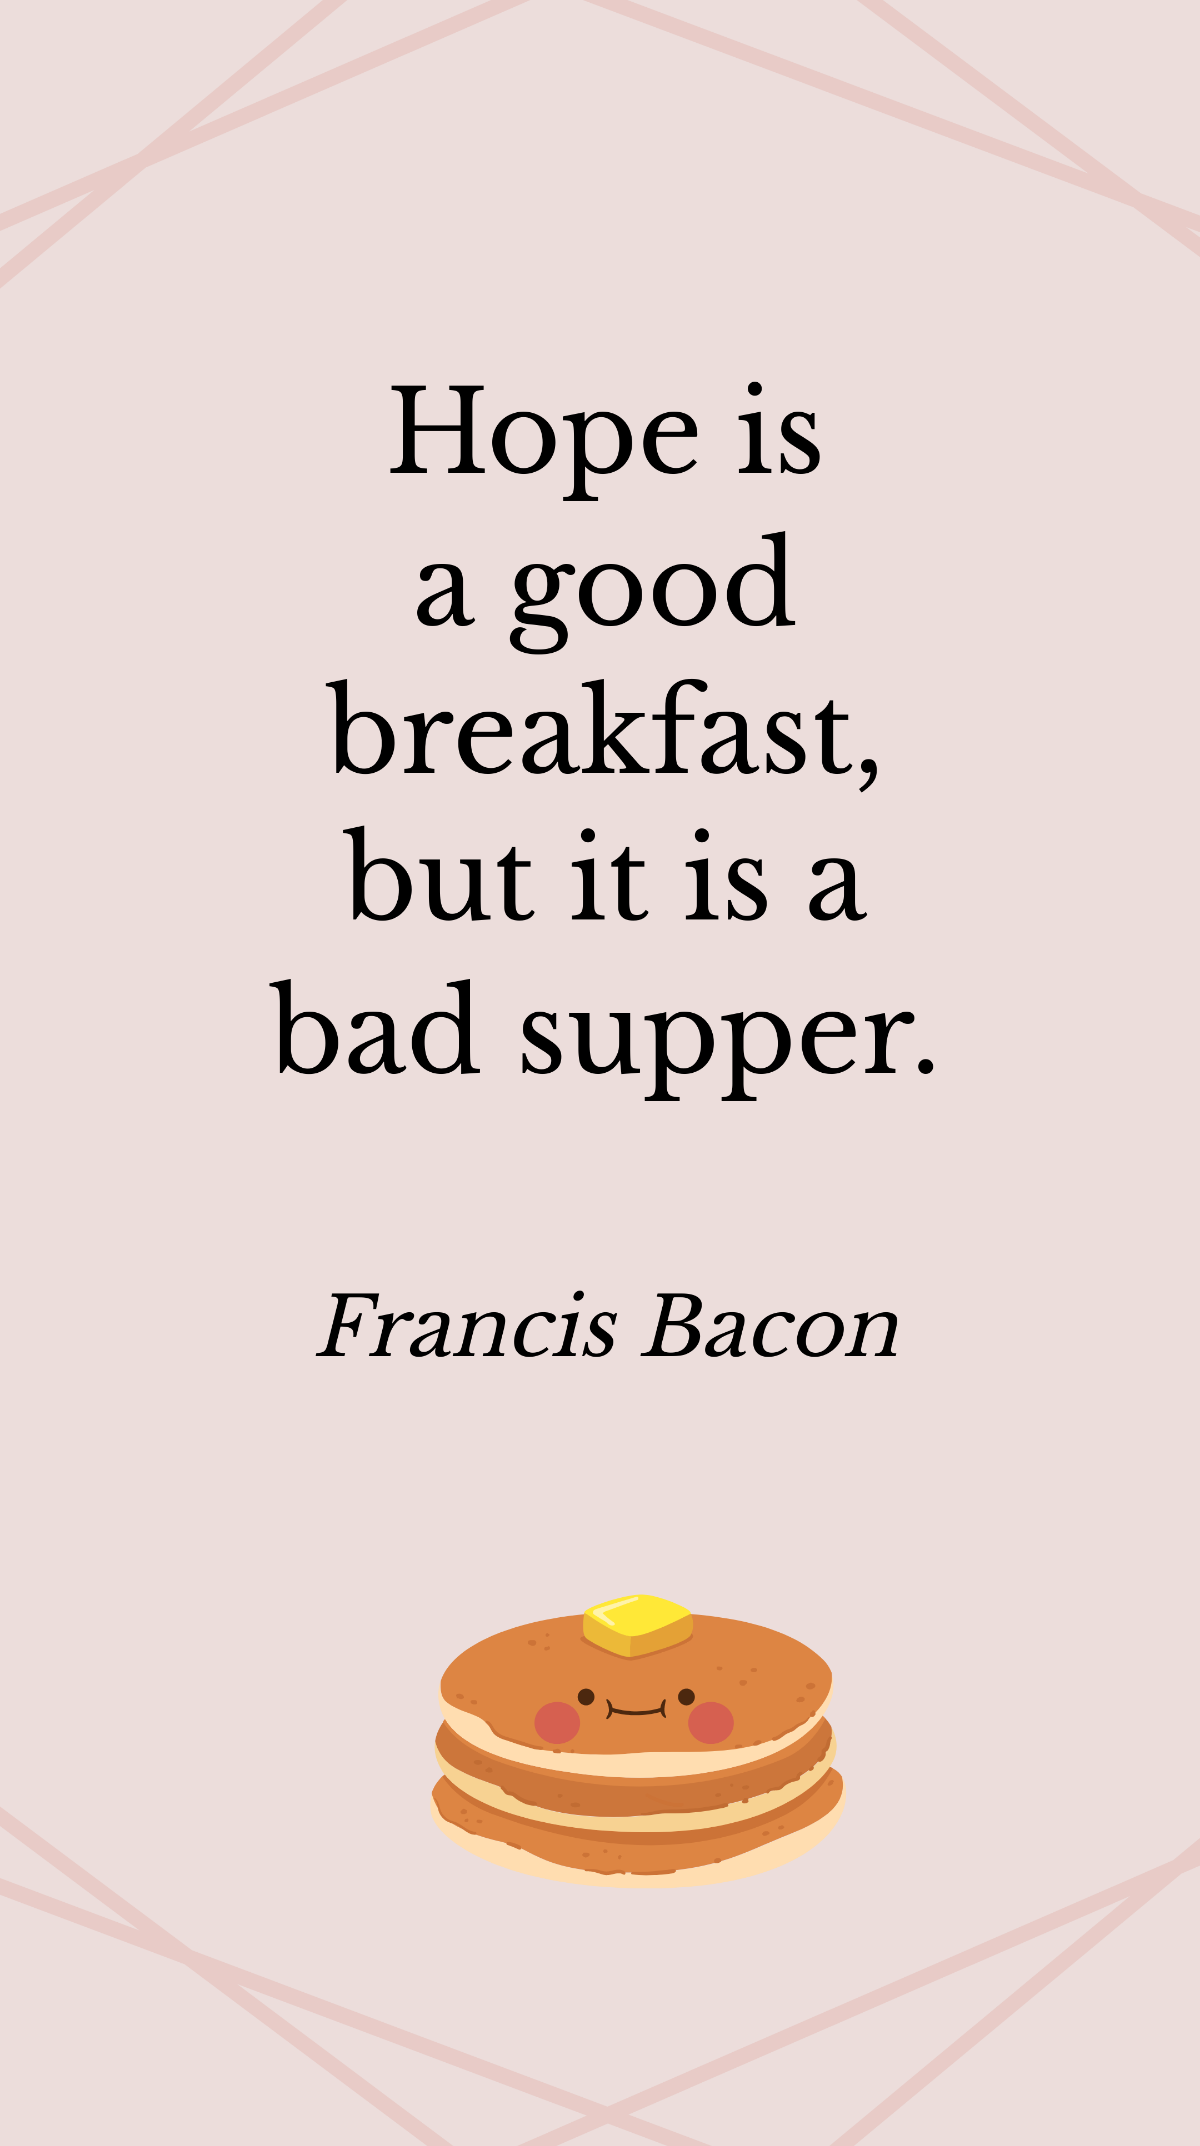 Francis Bacon - Hope is a good breakfast, but it is a bad supper. Template